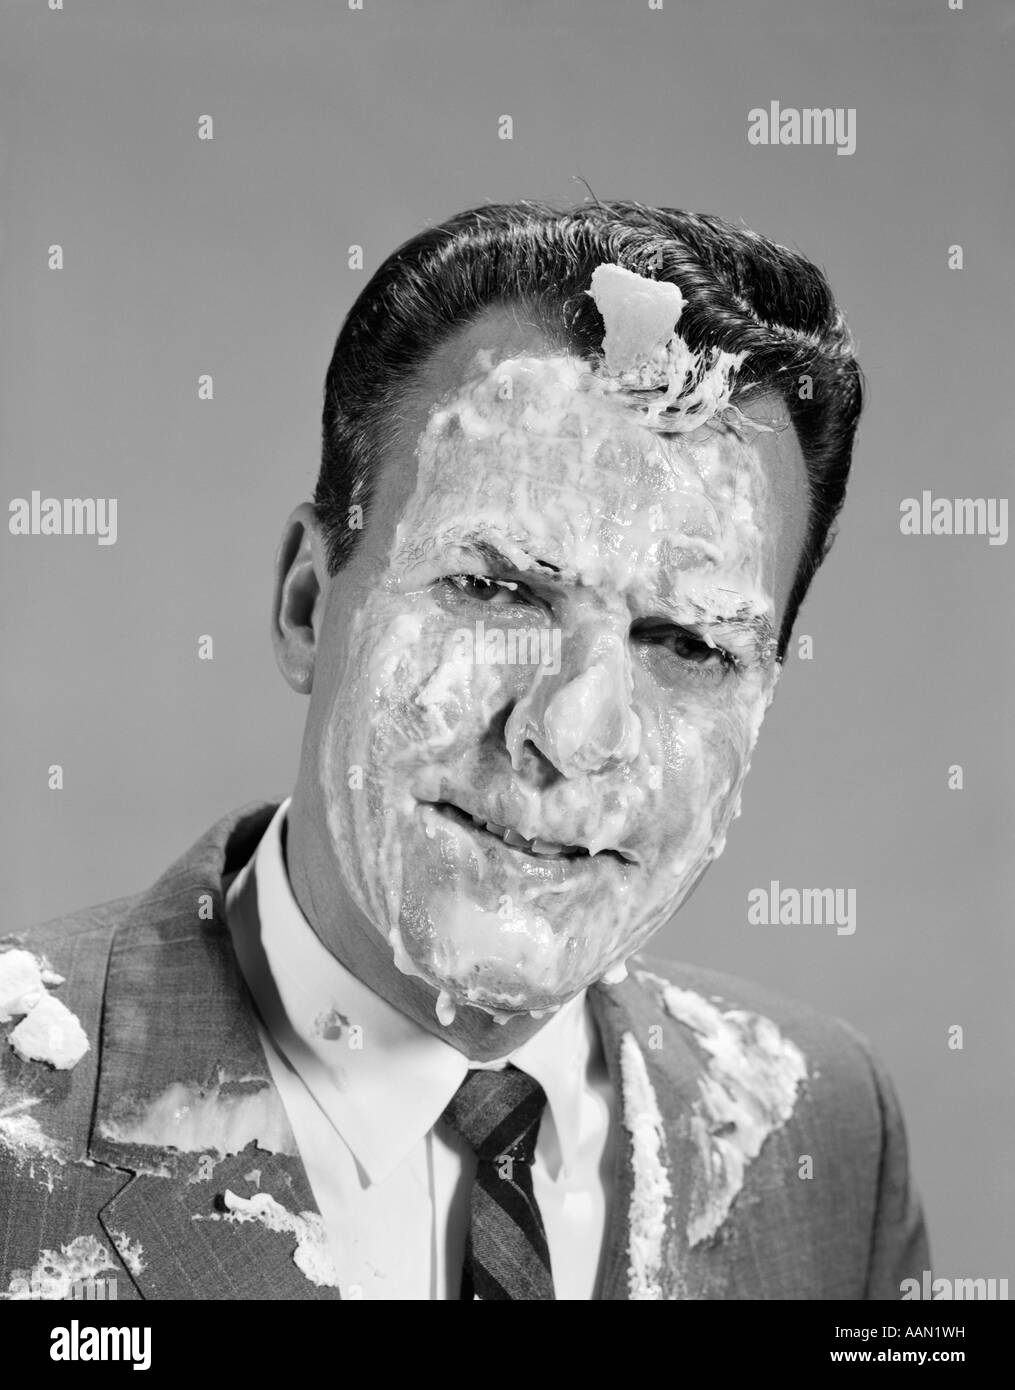 1960s PORTRAIT MAN COVERED IN MERINGUE SHAVING CREAM PIE IN THE FACE FUNNY ANGRY EXPRESSION Stock Photo